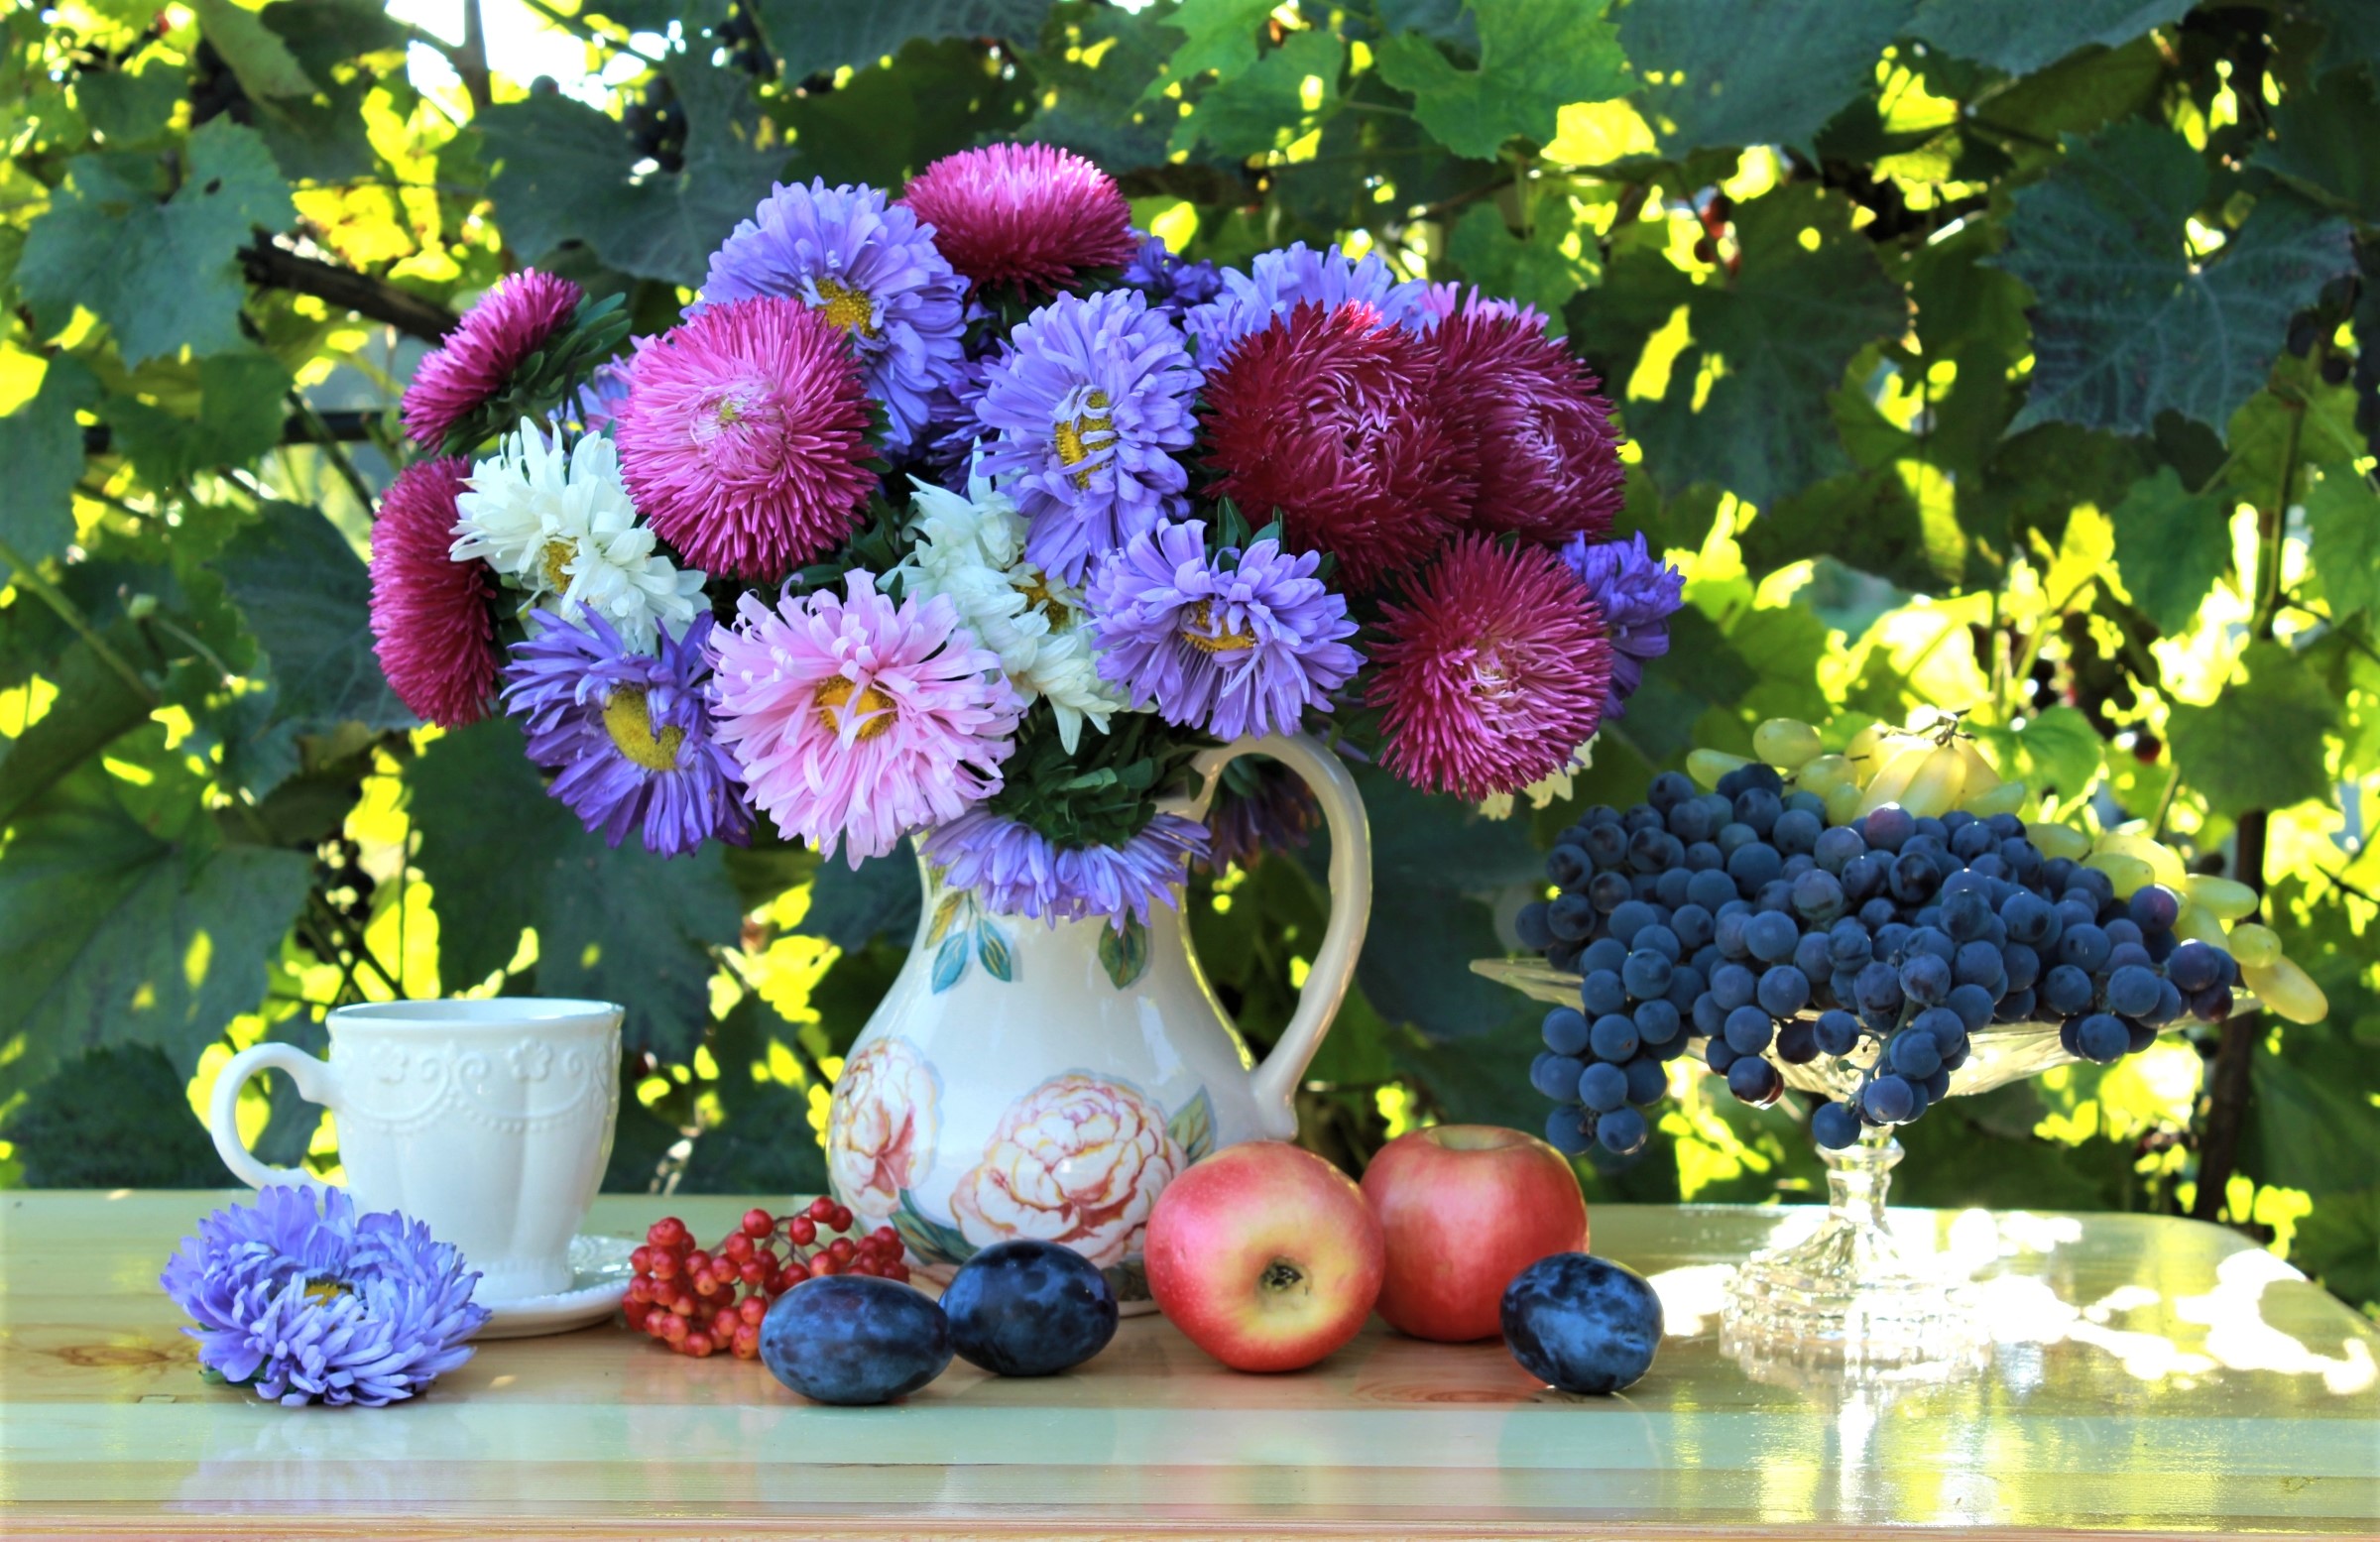 photography, still life, flower, fruit, grapes, outdoor, pitcher, teacup download HD wallpaper